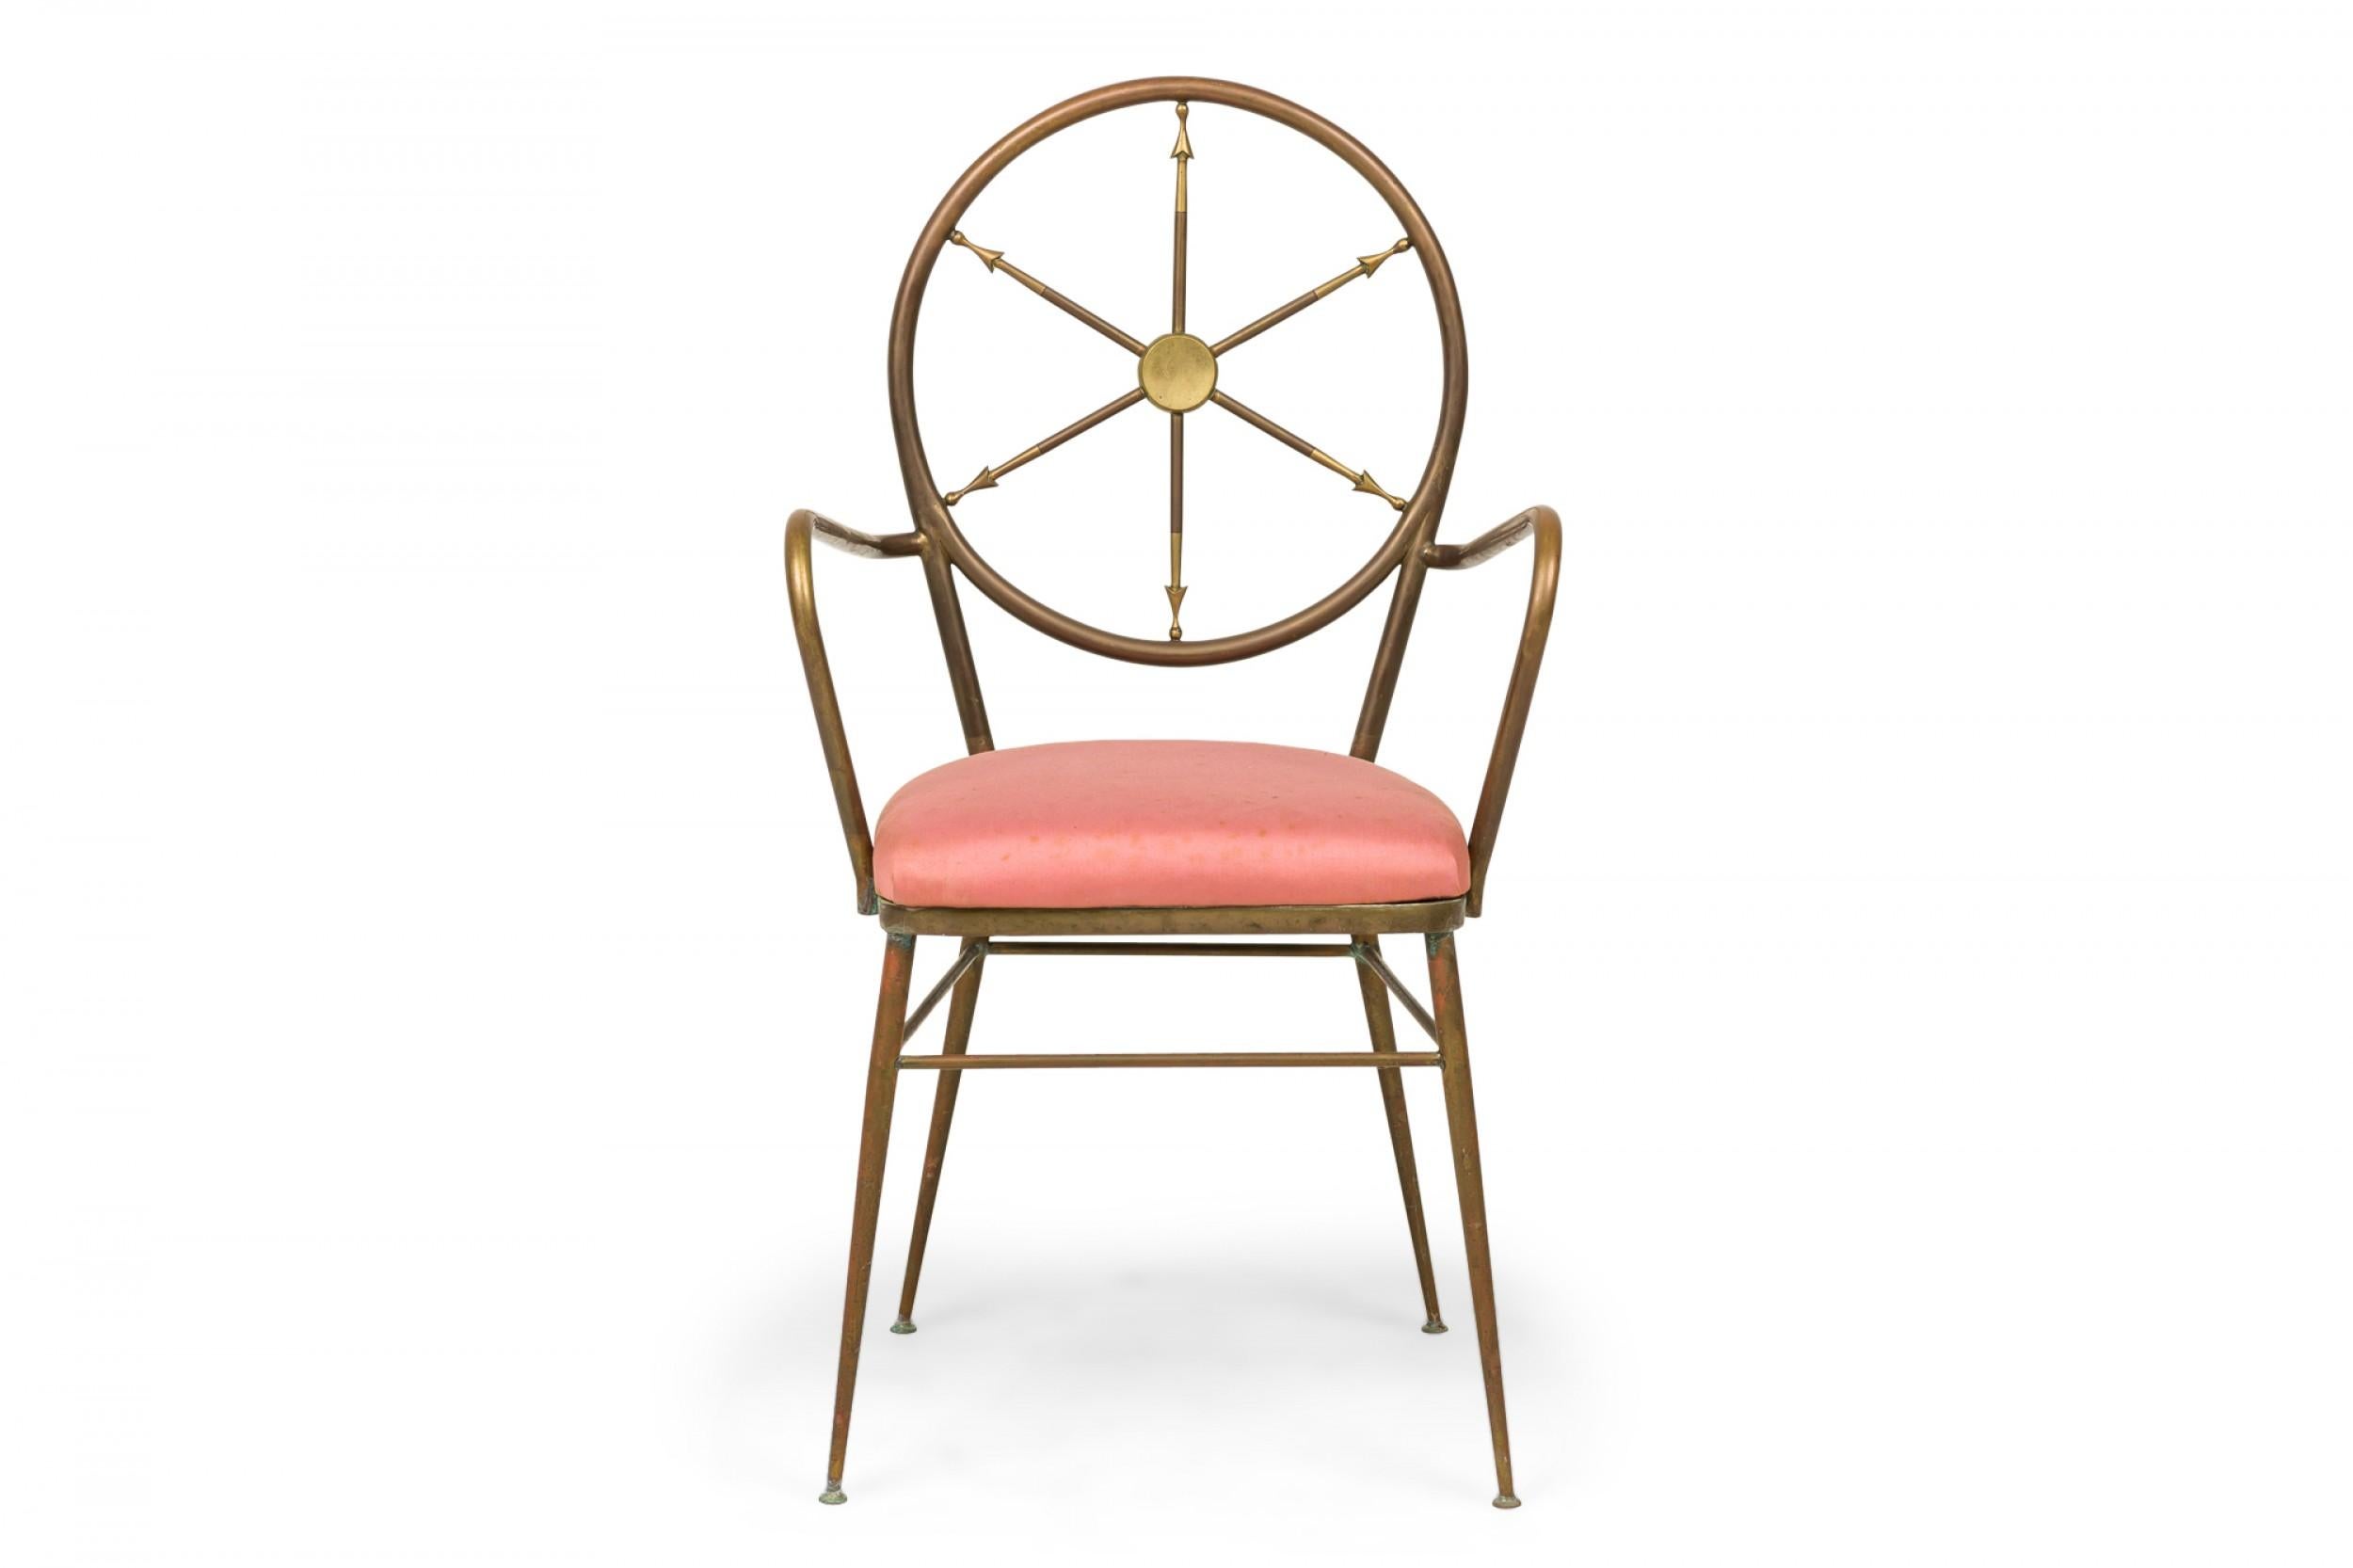 Set of 4 Italian Mid-Century dining chairs (2 armchairs, 2 side chairs) with brass frames featuring ship's wheel design backs and rose pink fabric upholstered slip seats. (GIO PONTI)(PRICED AS SET).